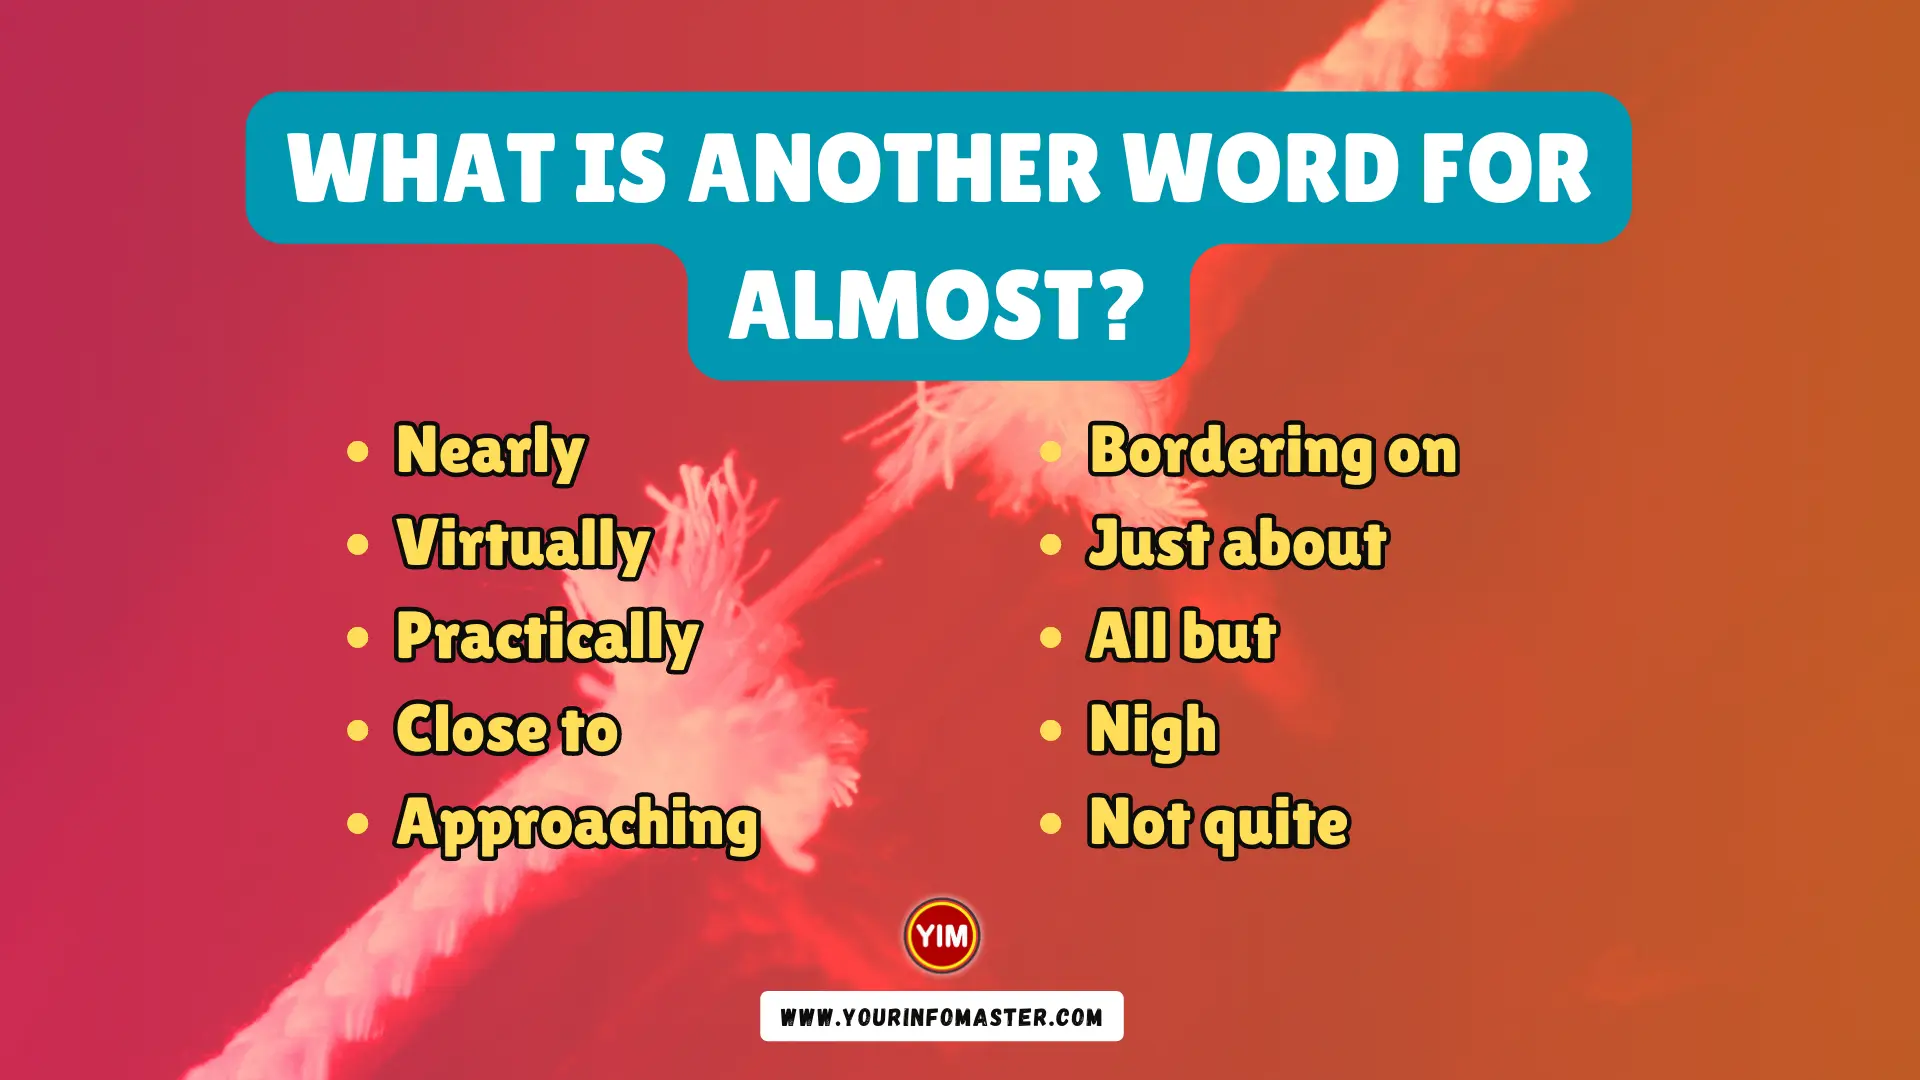 What is another word for Almost